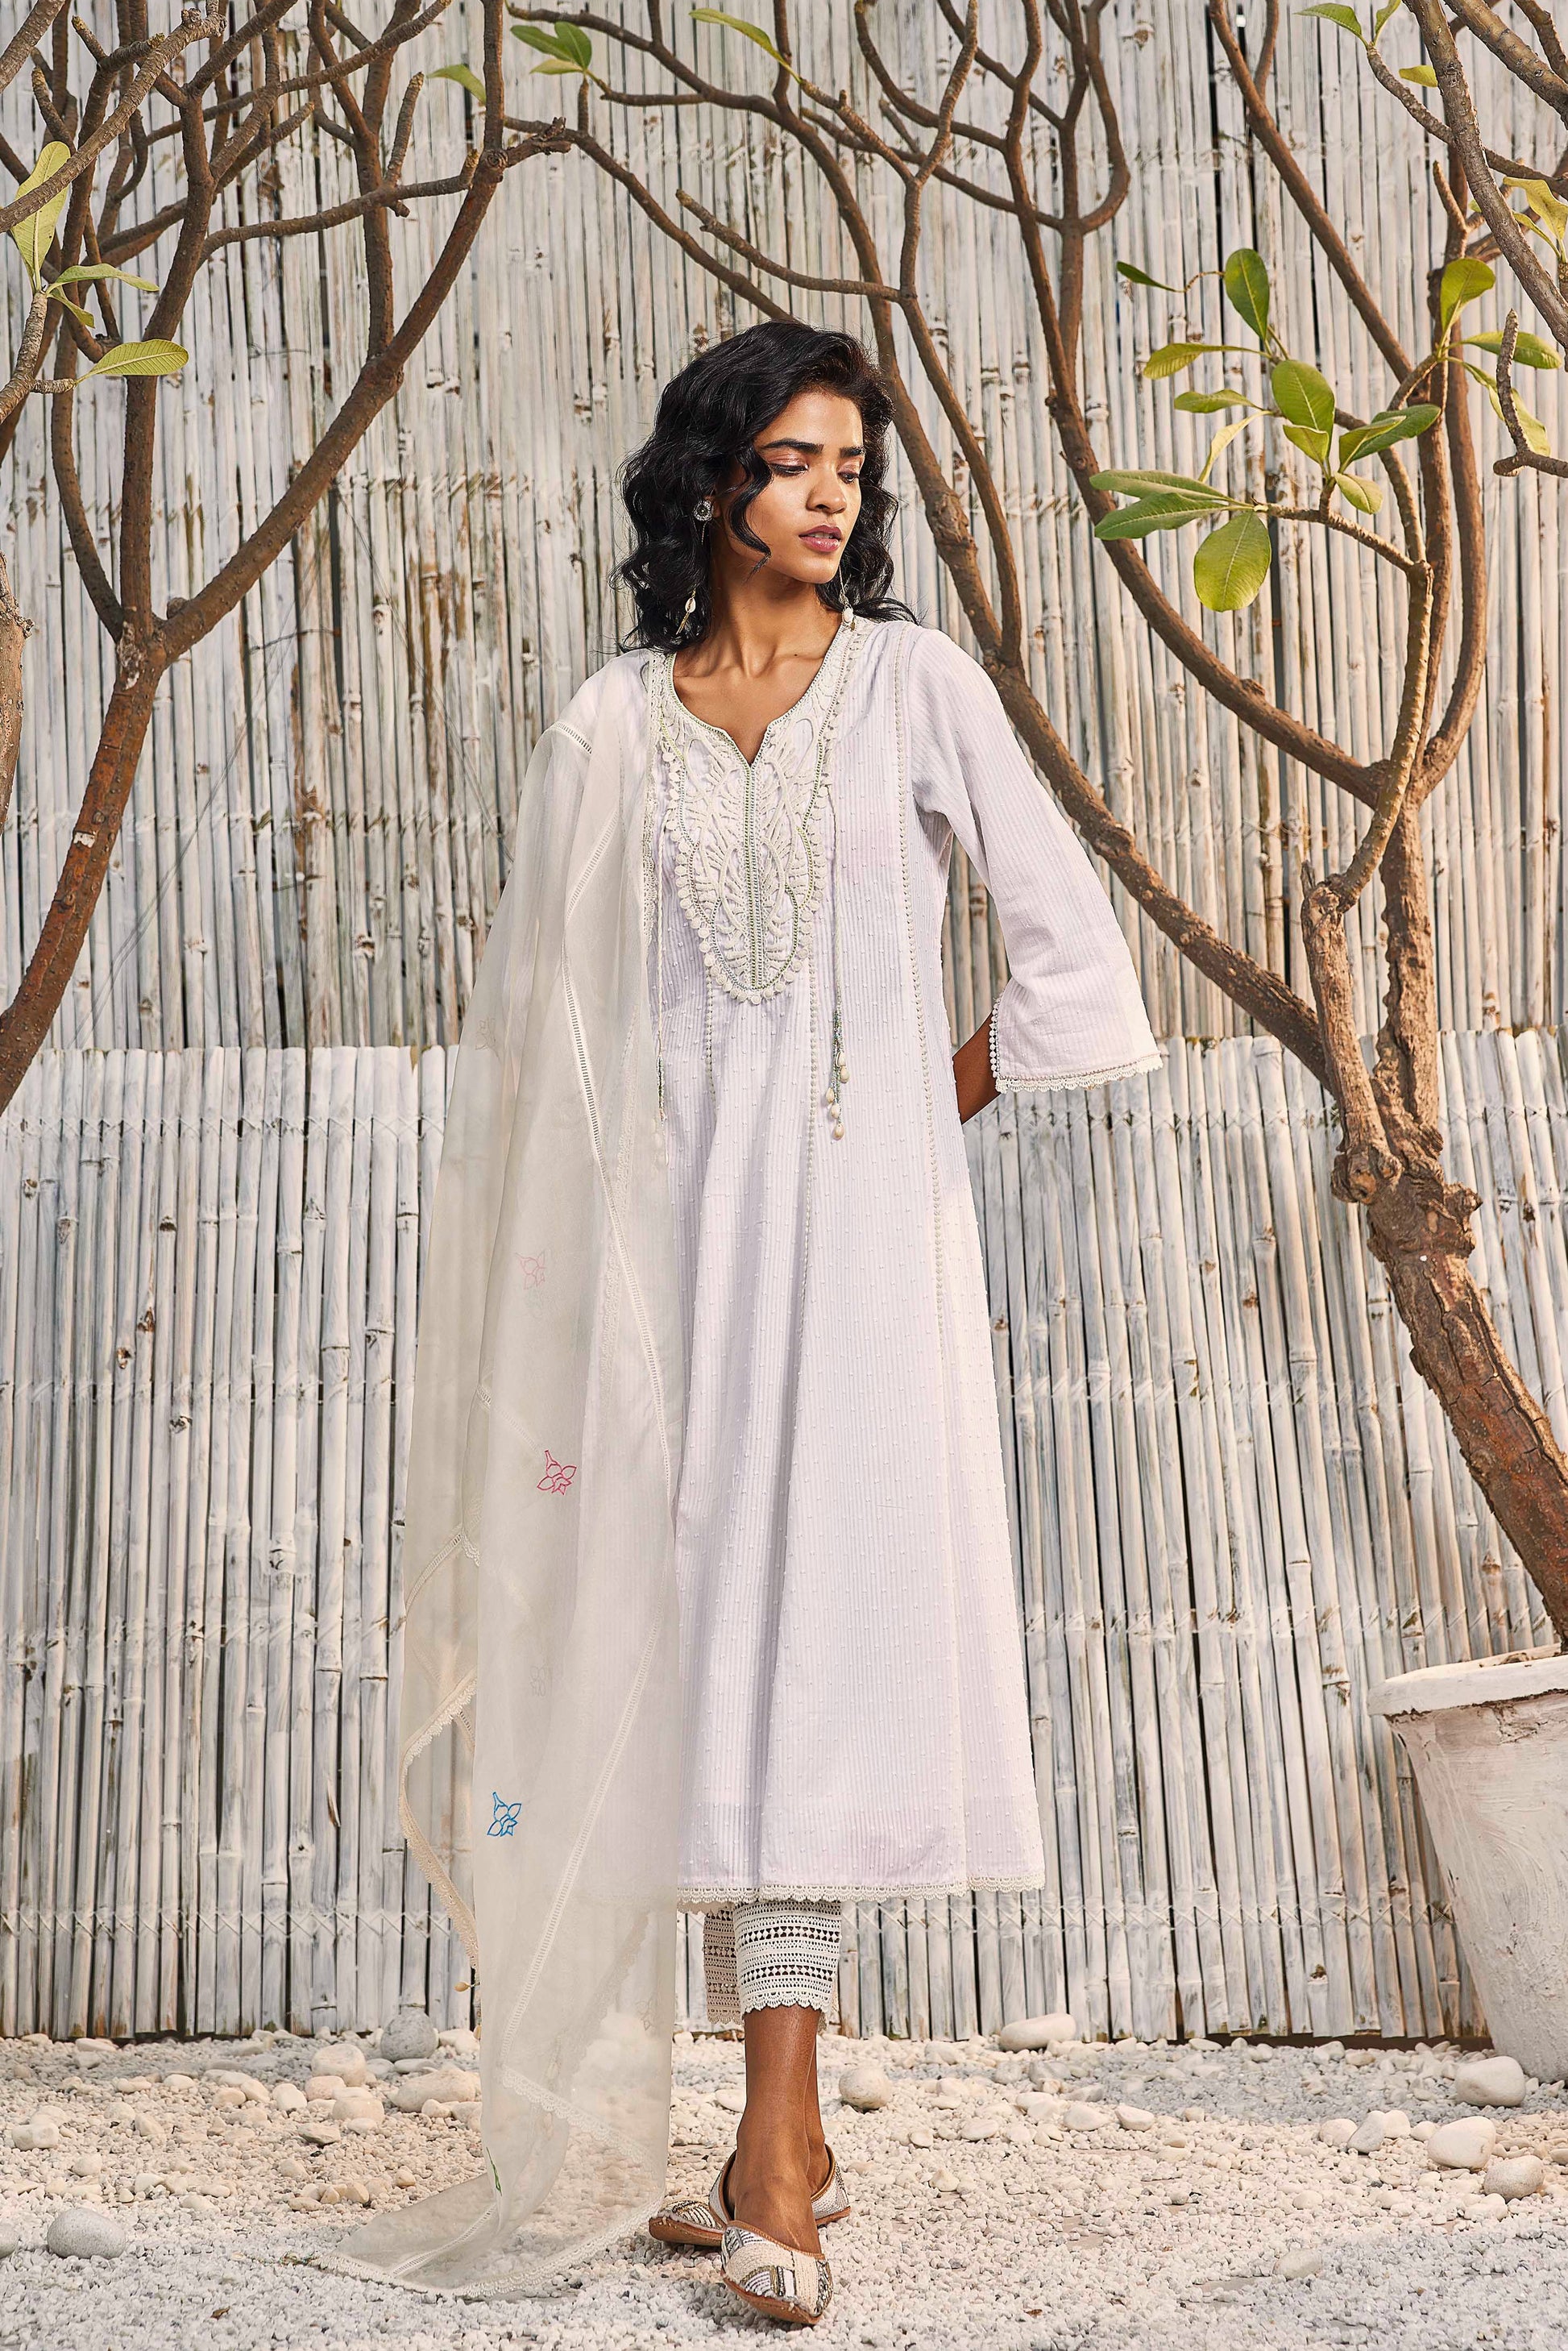 Off-White Flairy Cotton Kurta with Pant - Set of 3 at Kamakhyaa by Charkhee. This item is Cotton, Cotton Satin, Dobby Cotton, Festive Wear, Indian Wear, Kurta Pant Sets, Kurta Set With Dupatta, Natural, Off-white, Organza, Regular Fit, Shores 23, Textured, Womenswear